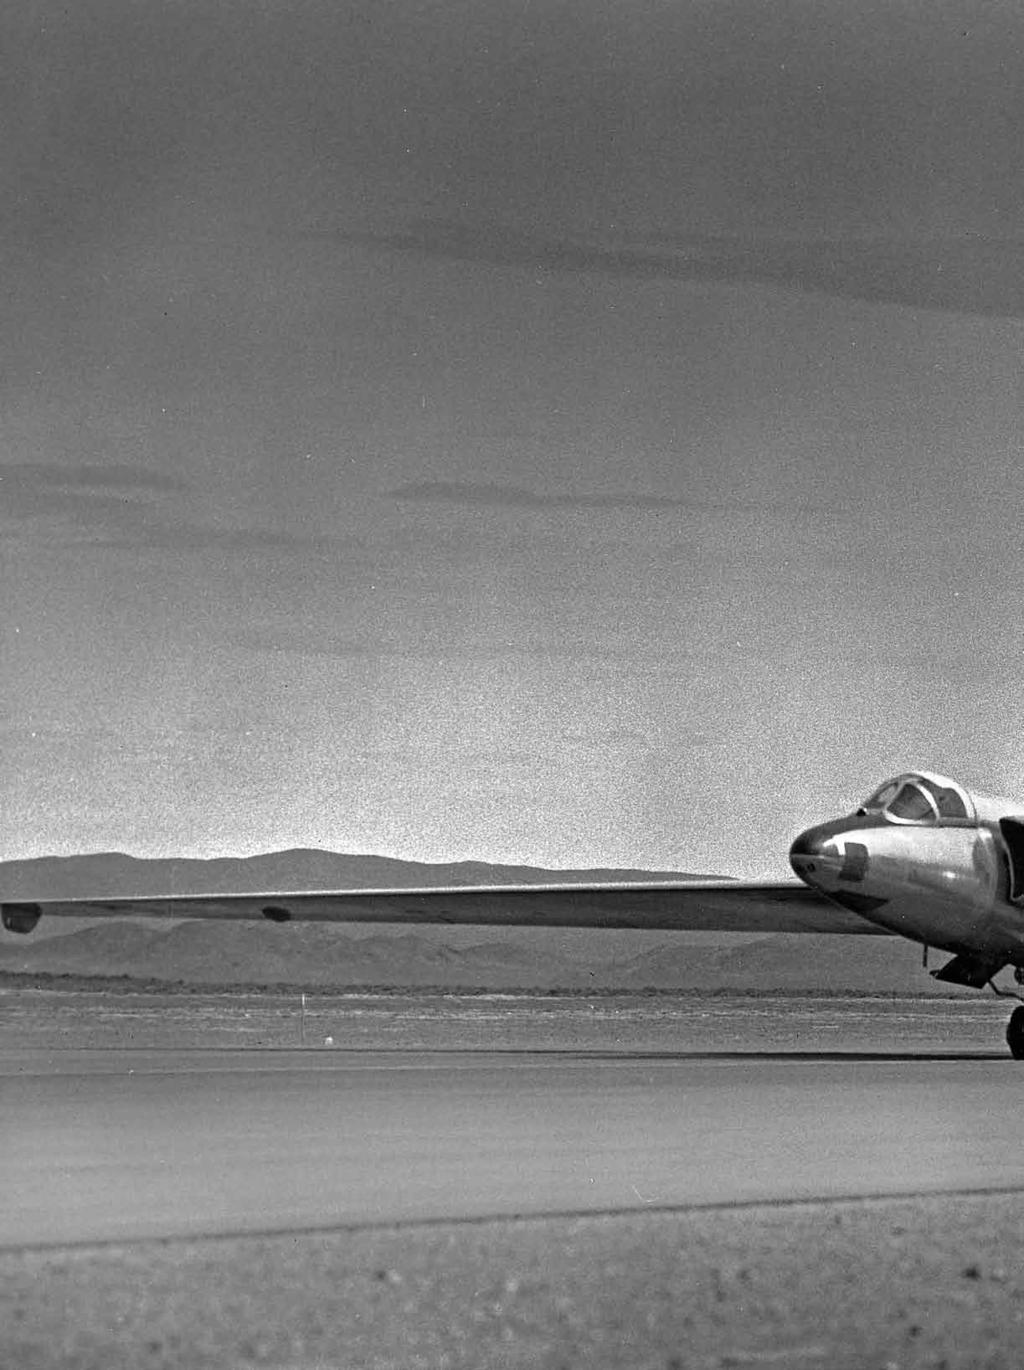 Project Aqu In the 1950s, the epoch-making U-2 spyplane was young, promising, and